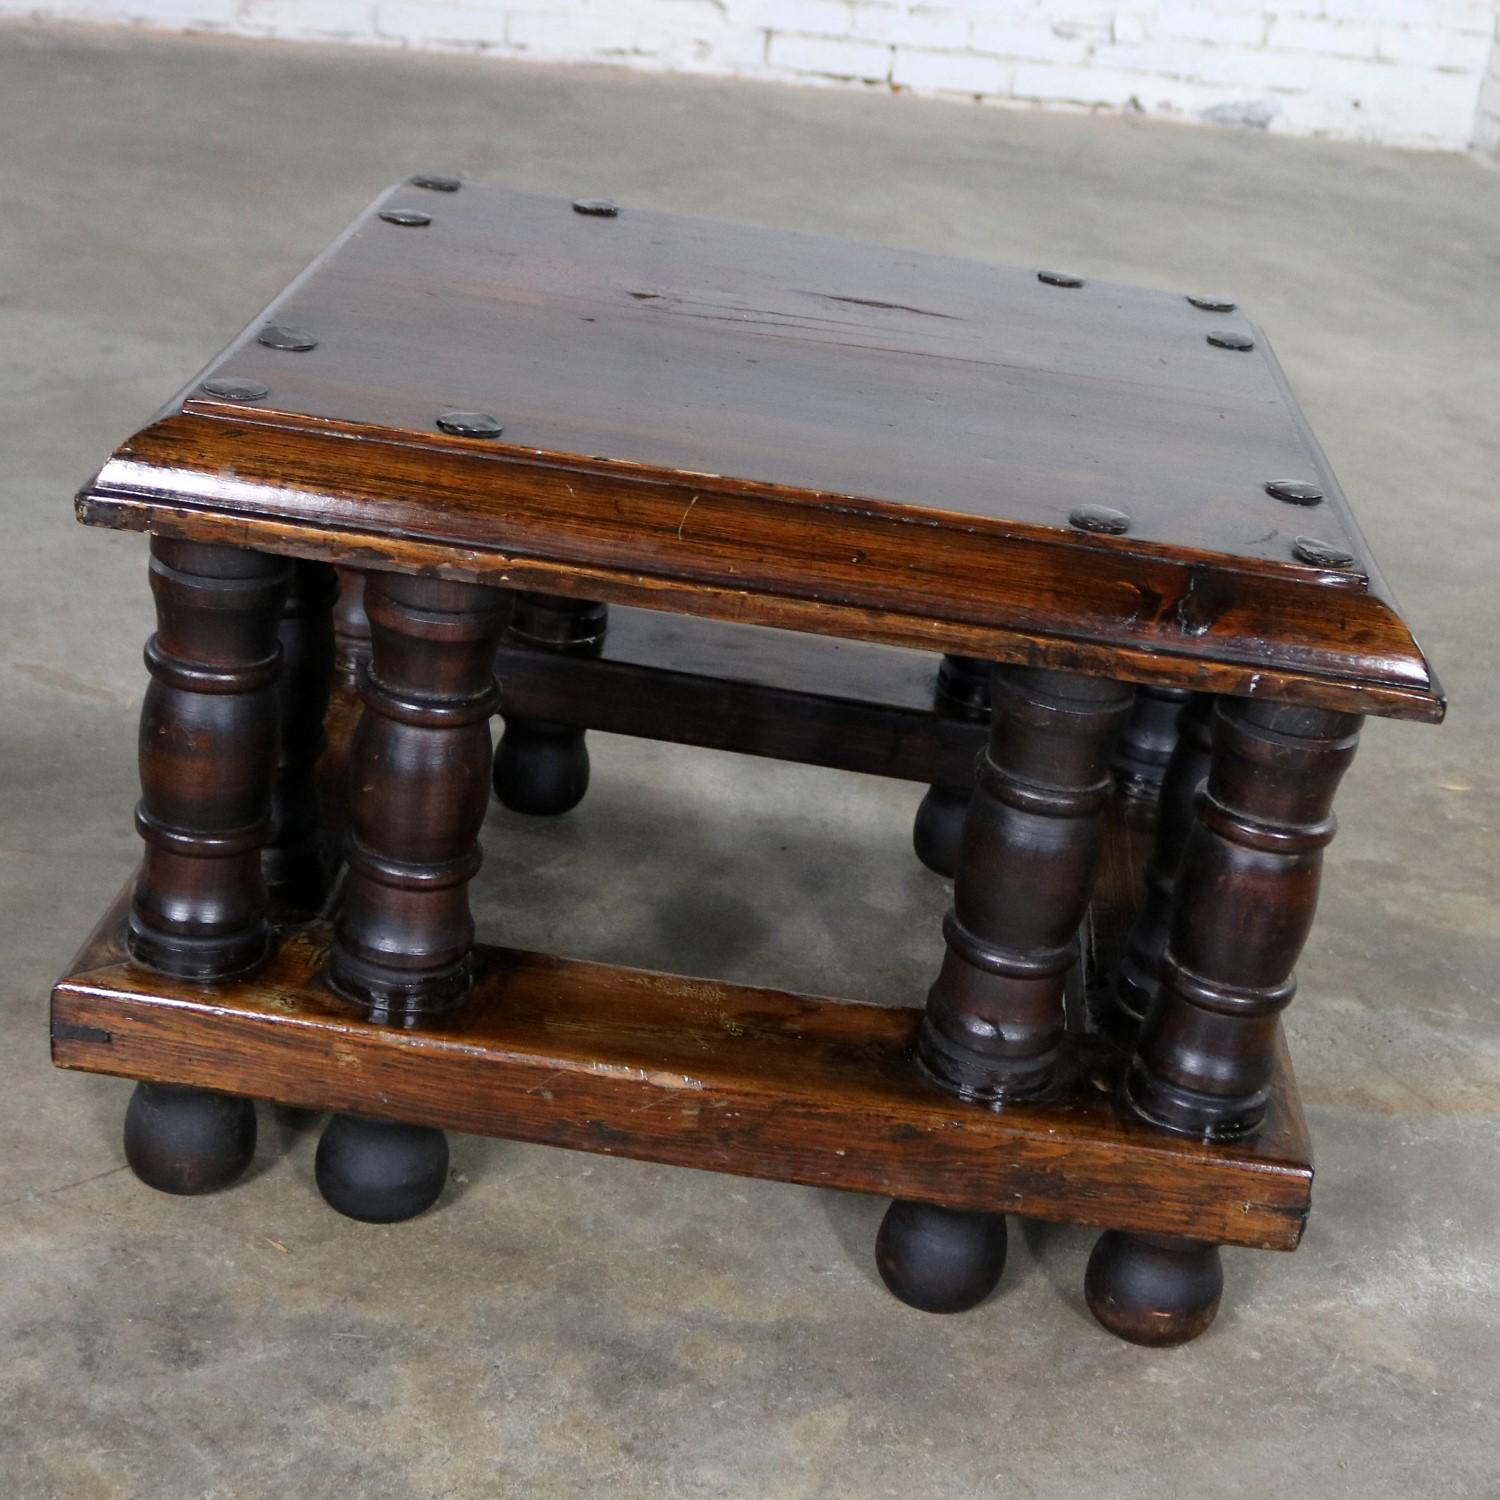 Wonderful Spanish Revival style square end or side table by Artes de Mexico Internacionales, SA. It is in fabulous vintage condition with hand-hammered metal extra large nailheads, turned legs, and lots of age patina with its original tag, circa